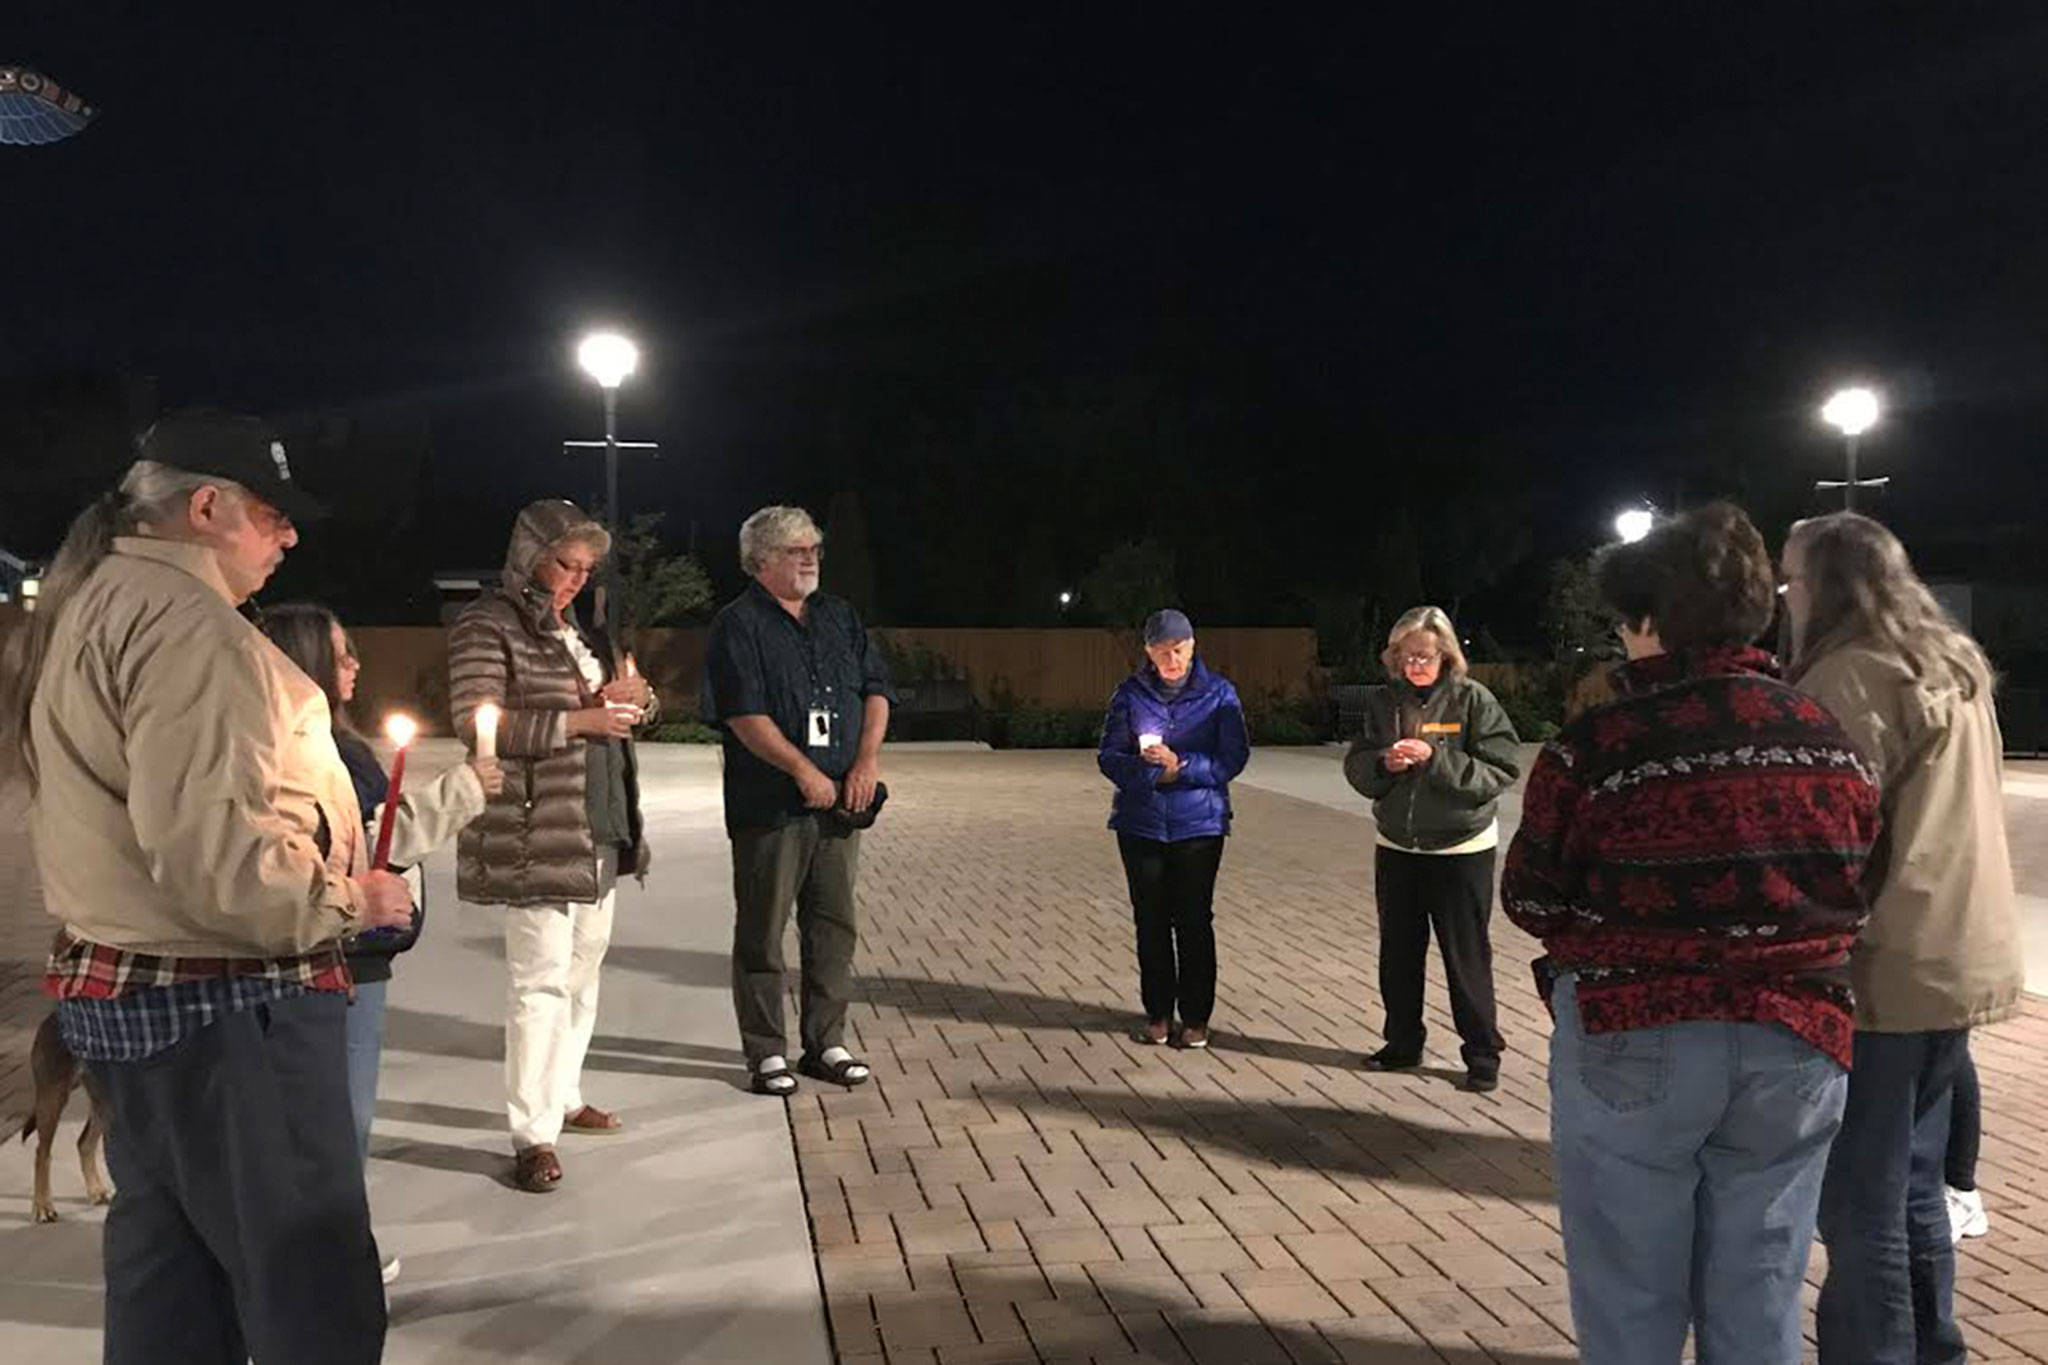 Small candlelight vigil held for Las Vegas victims